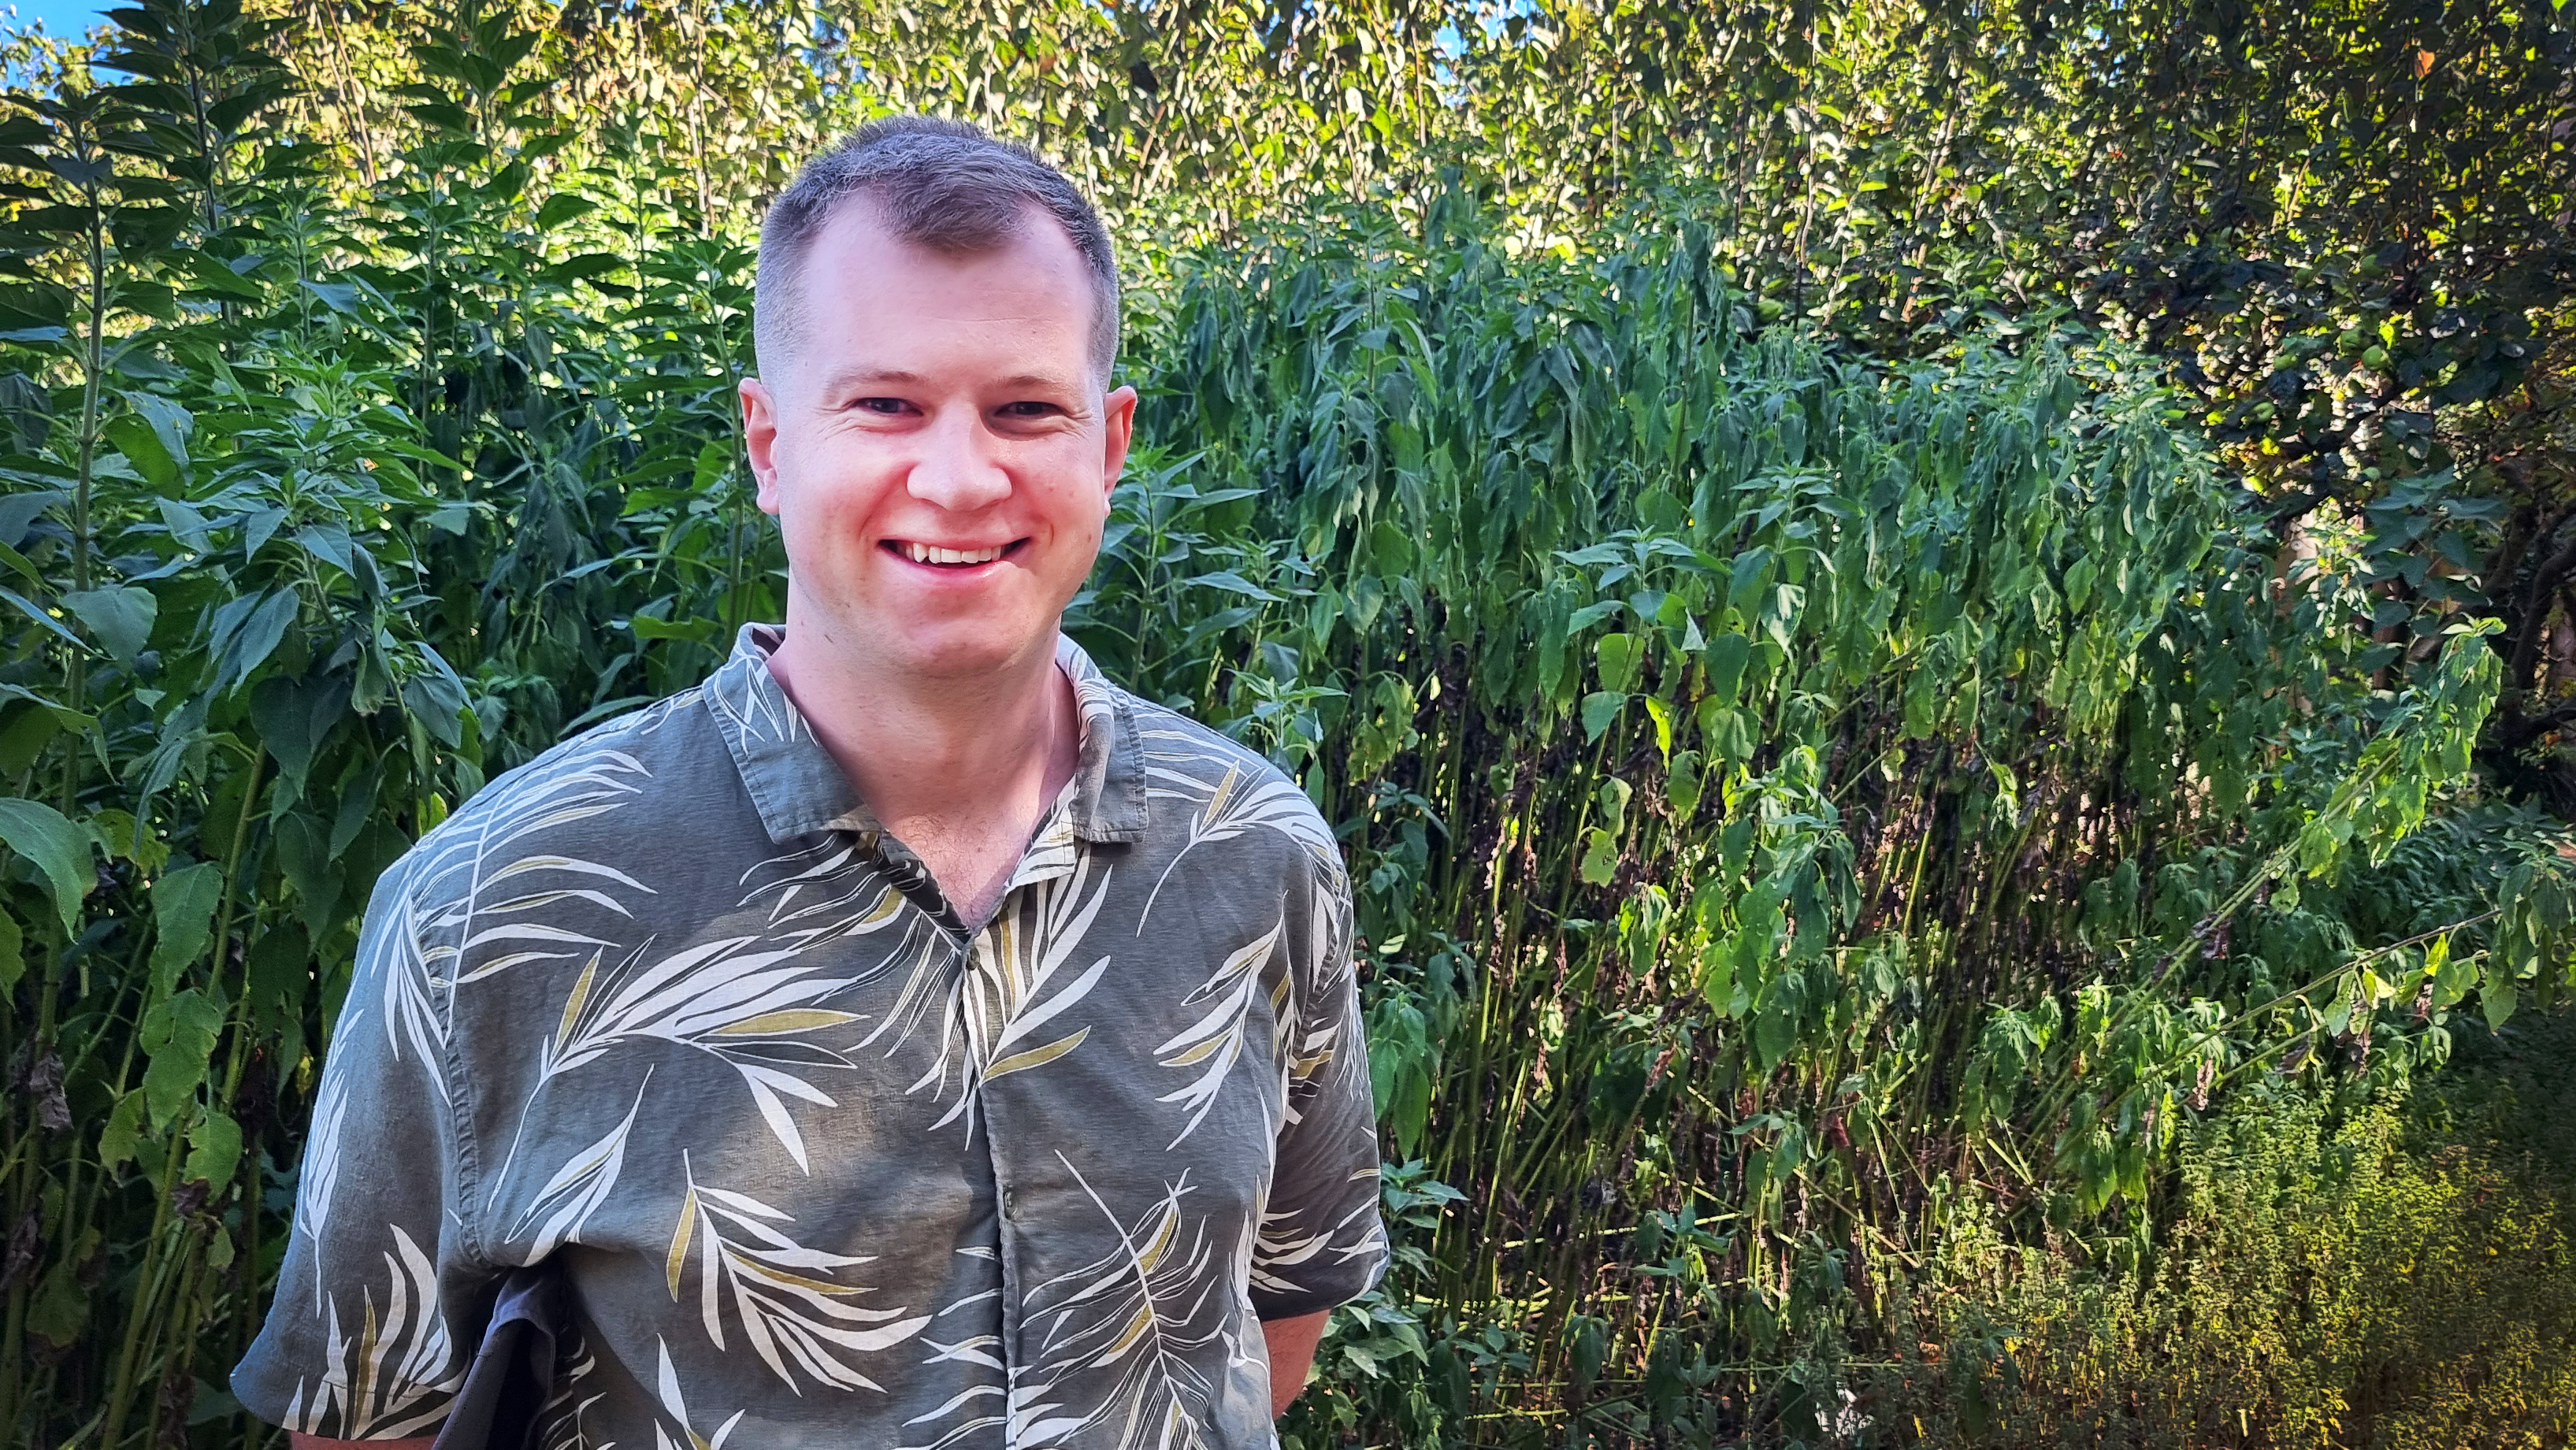 Leith wears a brown collared shirt with leaf patterns and stands in front of tall shrubs and trees 